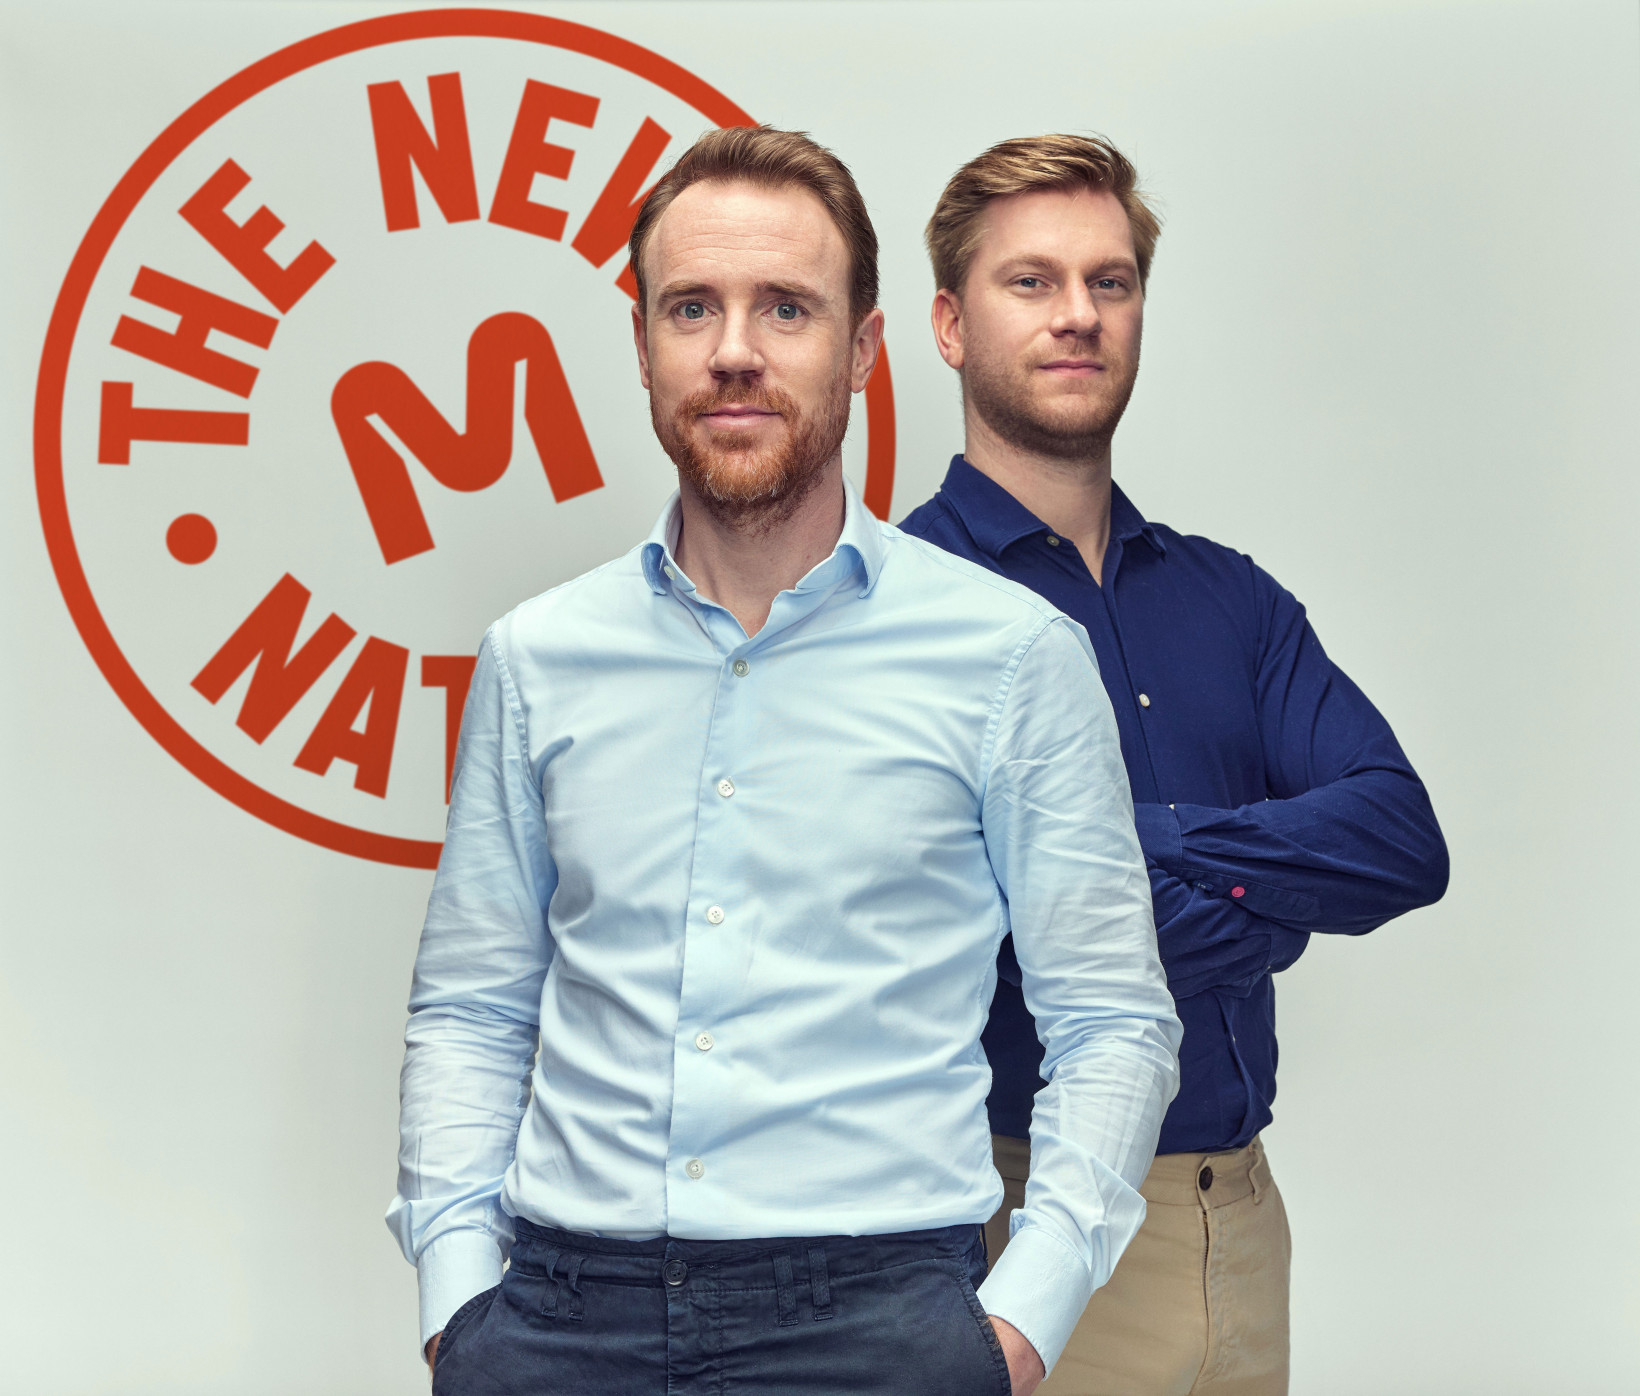 Luining (right) and his Meatable co-founder Krijn de Nood describe their products as "the new natural."